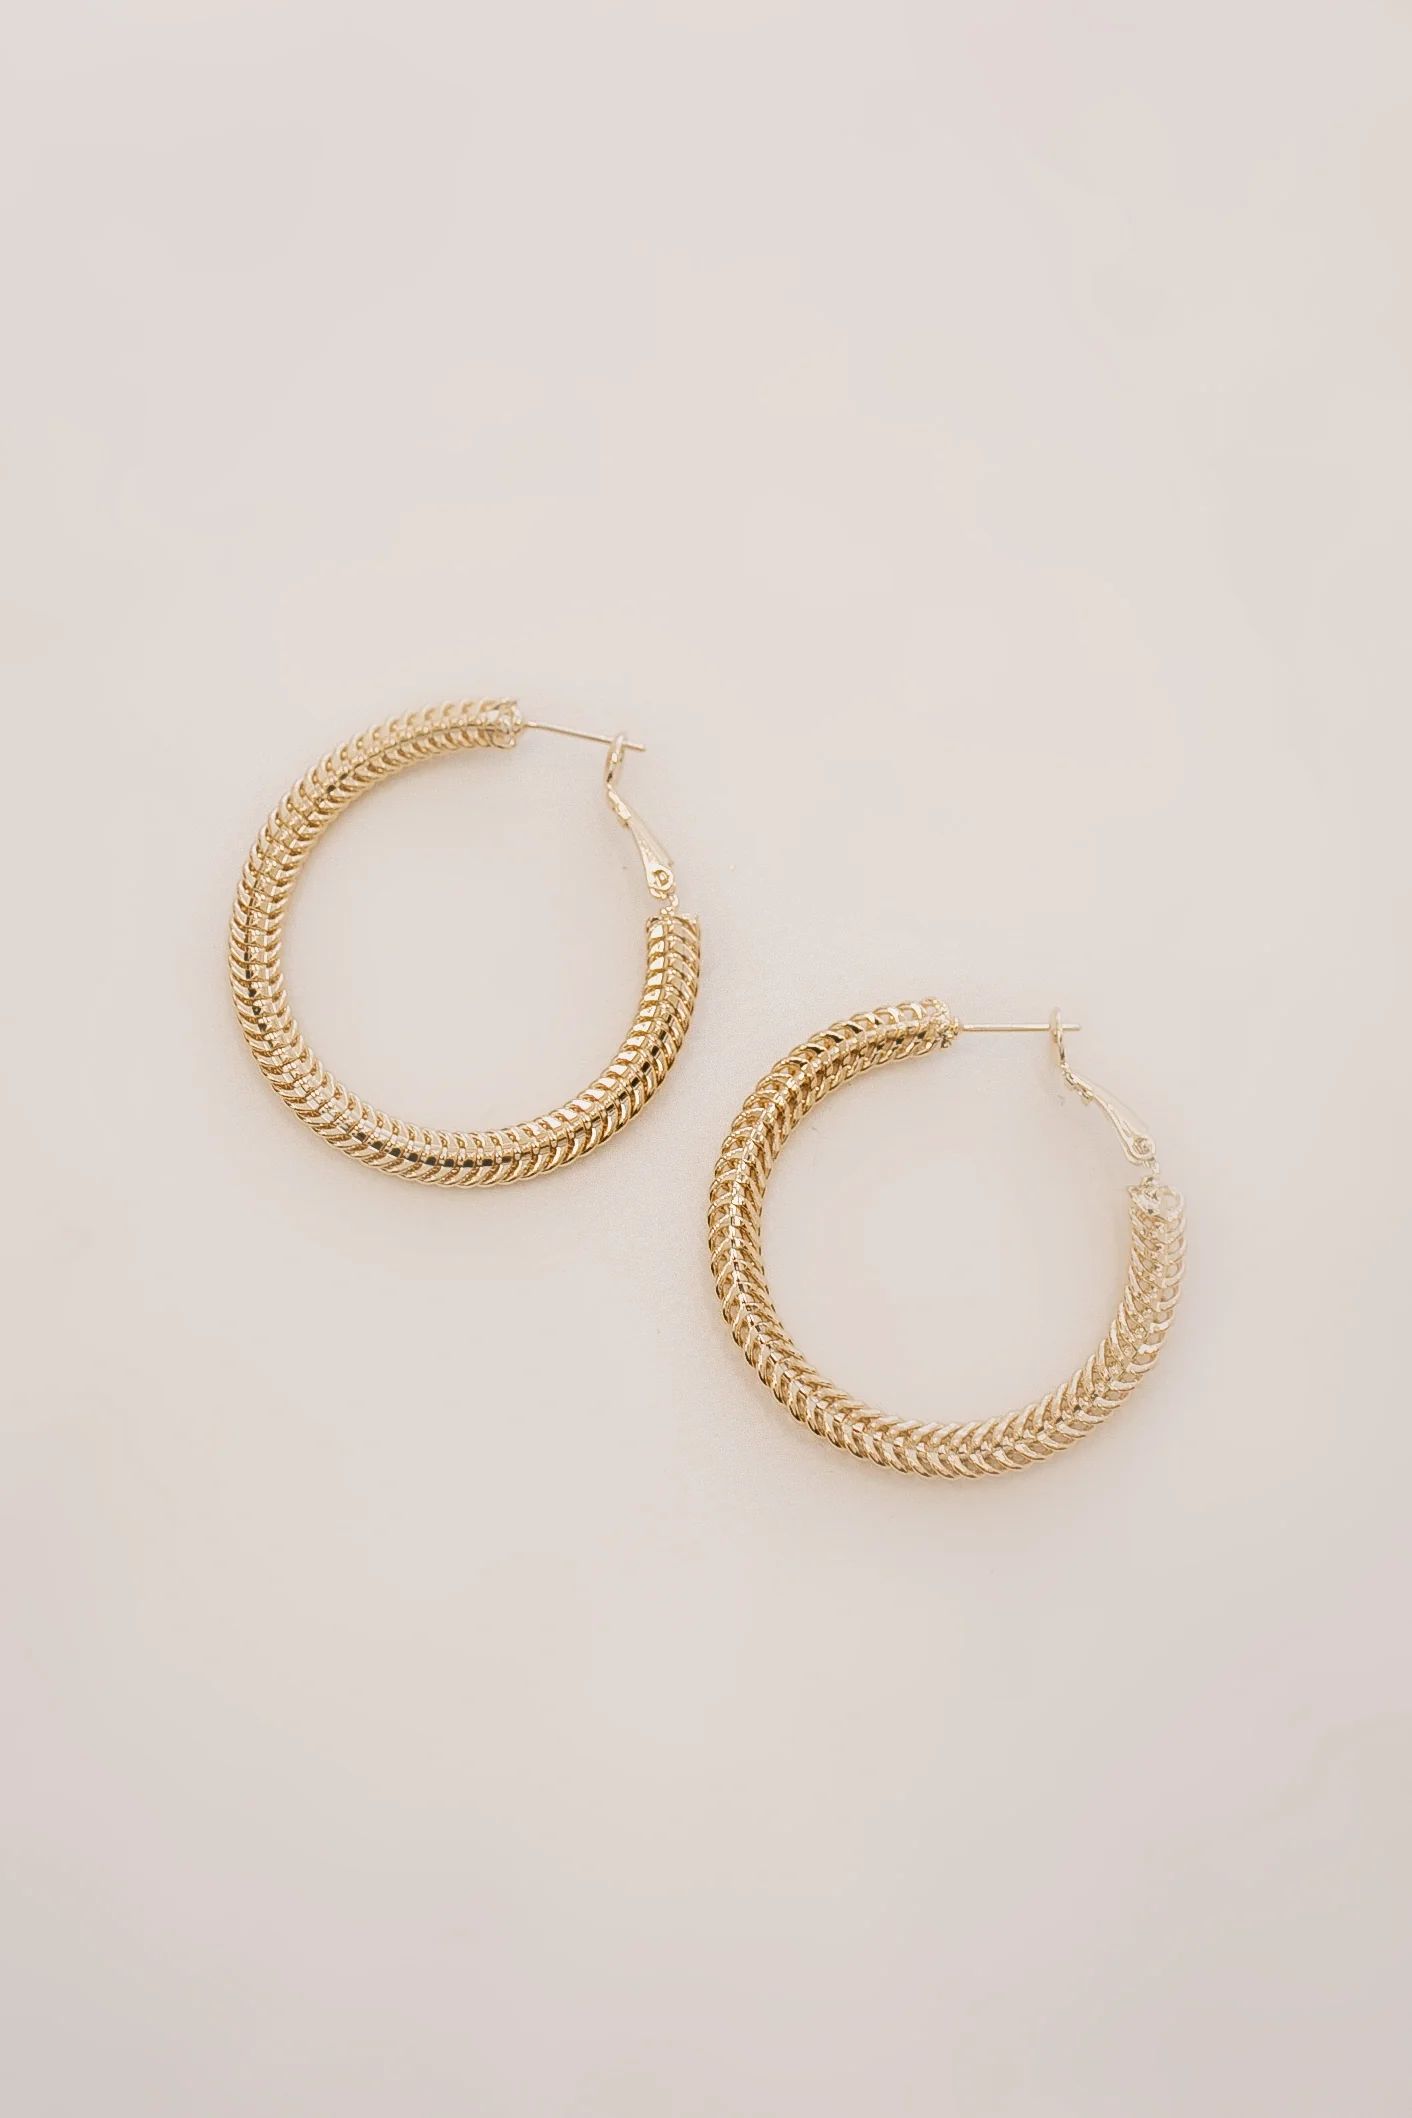 Bliss Chain Hoop - Gold | THELIFESTYLEDCO